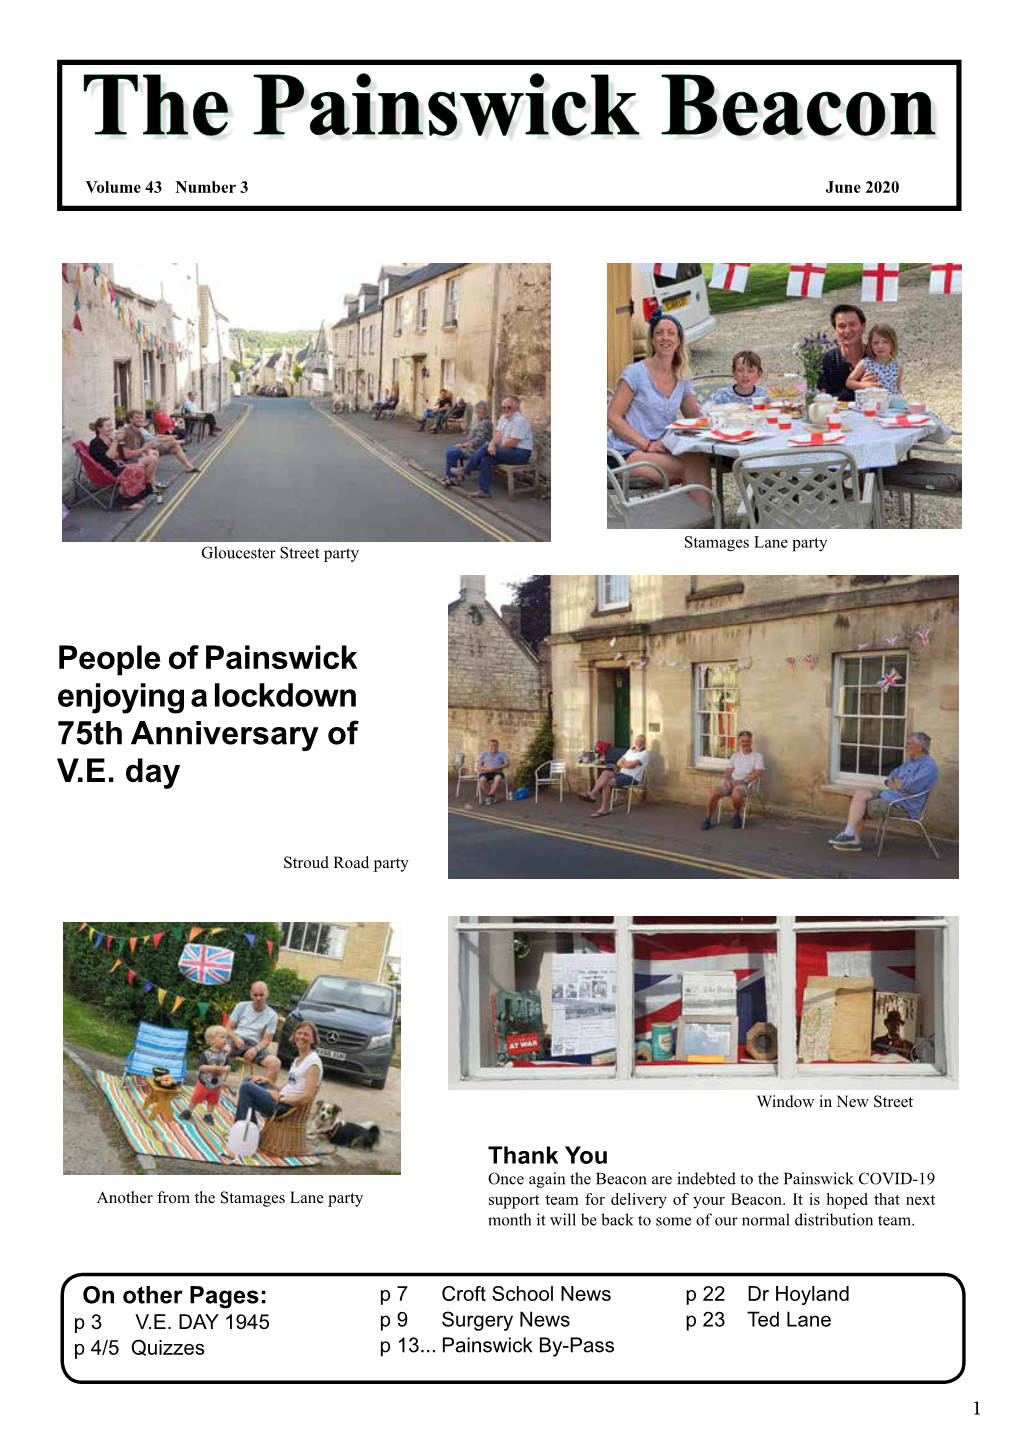 THE VILLAGE DIARY the Painswick